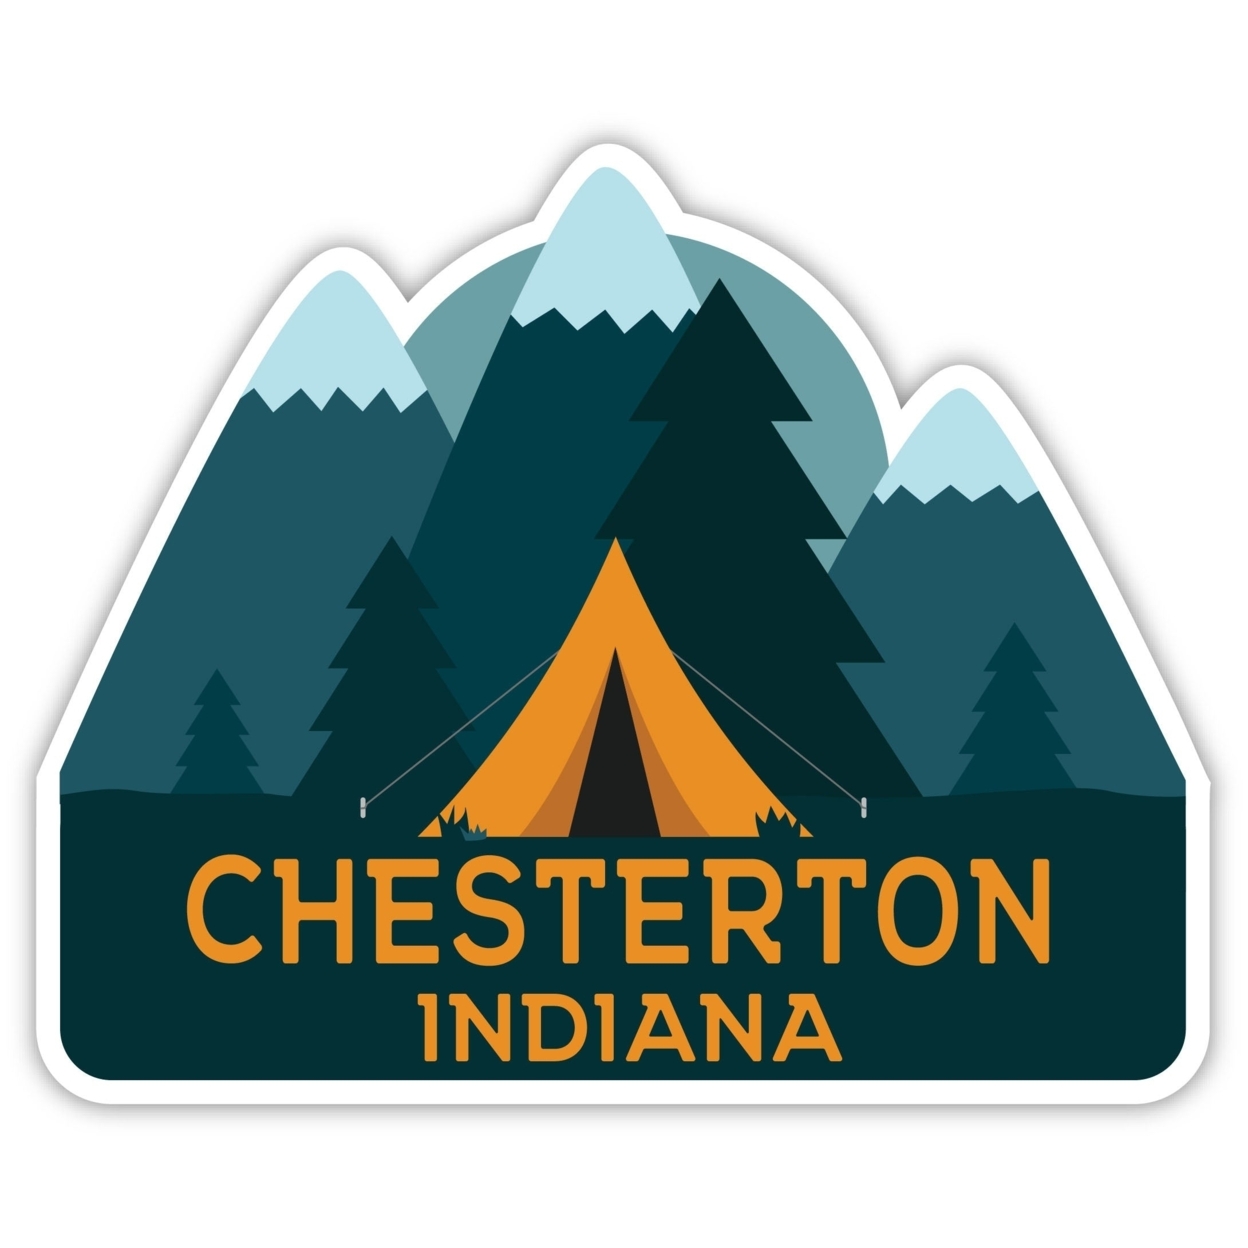 Chesterton Indiana Souvenir Decorative Stickers (Choose Theme And Size) - 4-Pack, 2-Inch, Tent